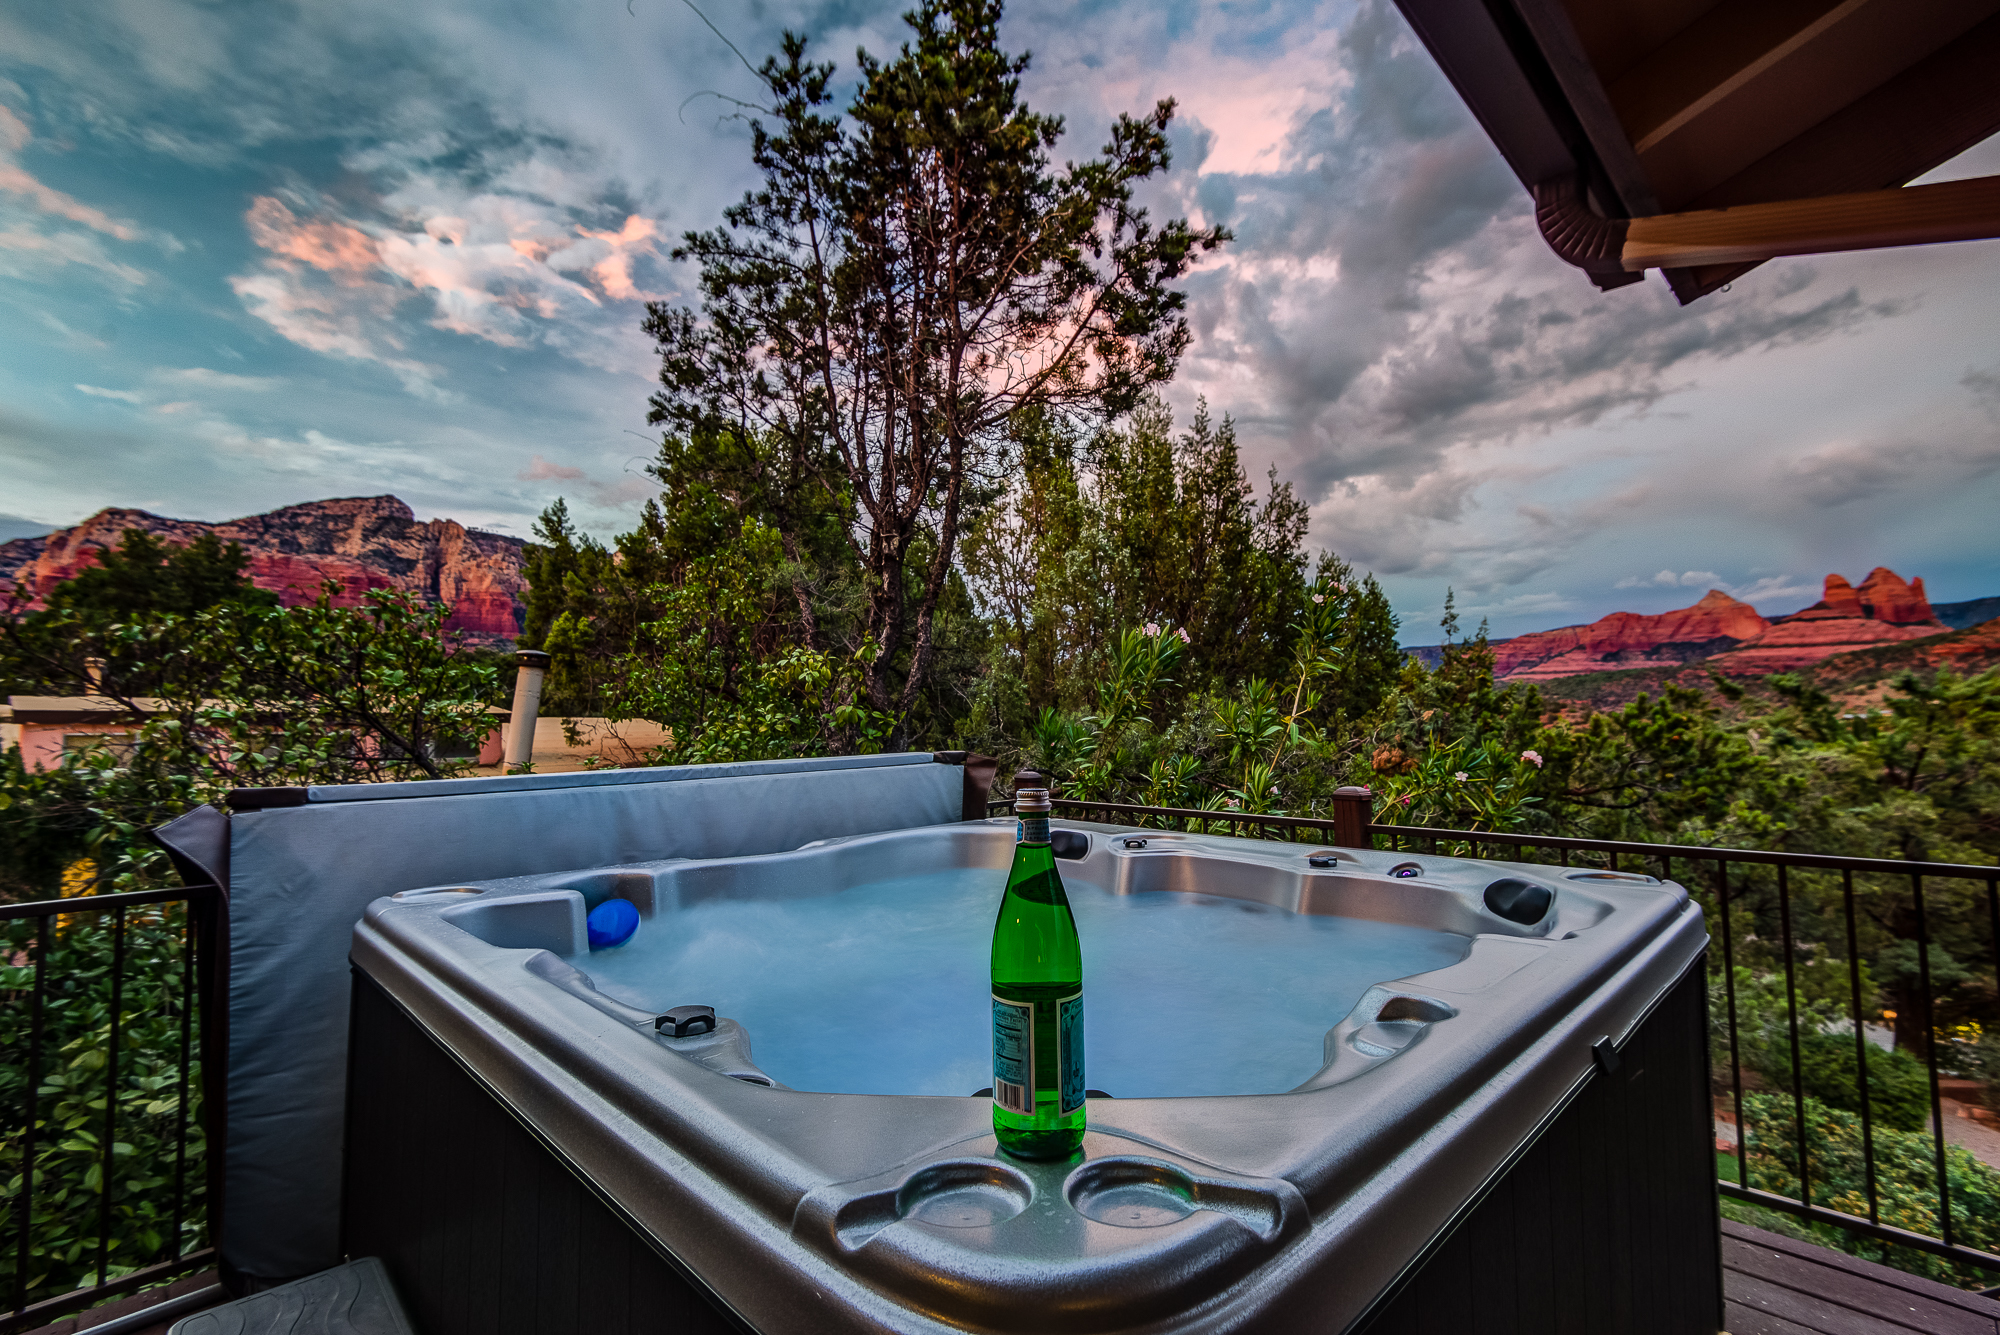 Sedona Dream Estate Offers Elevated Red Rock Views From Deck & Hot Tub Serene+Outdoor Fun!